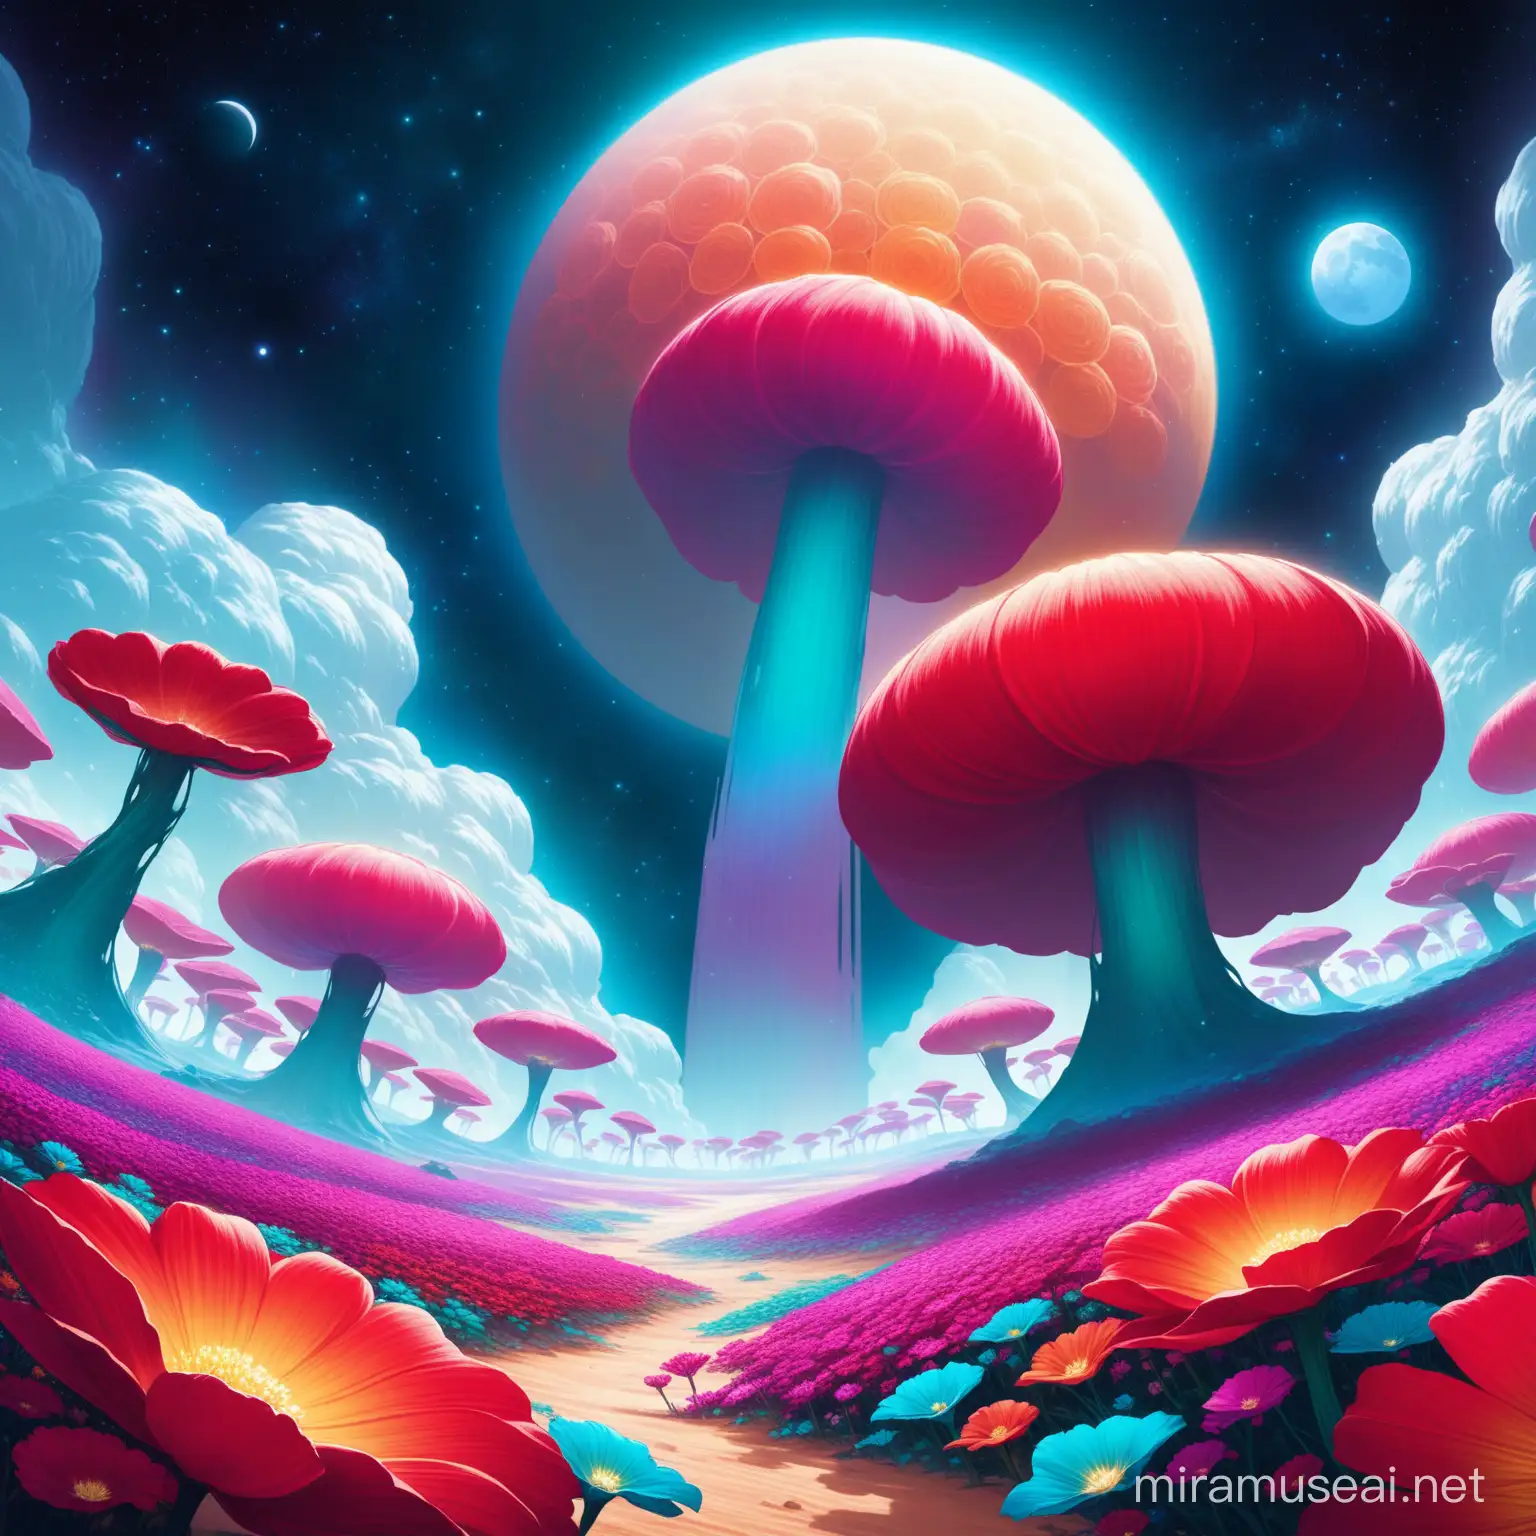 Vibrant Extraterrestrial Flora Surrounding a Lunar Colony